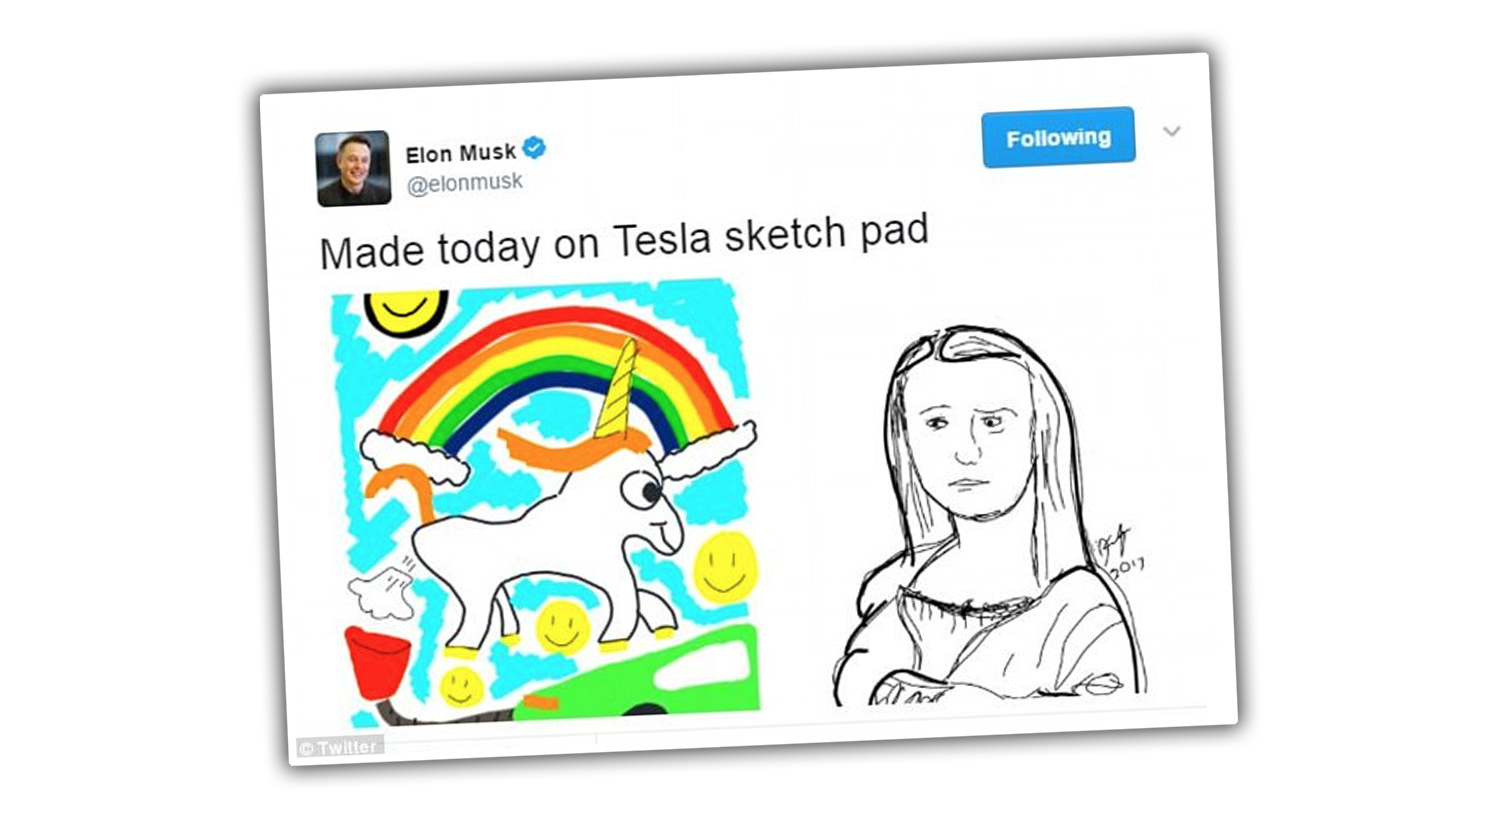 Tesla Used An Artist’s Work Without Permission And Elon Musk Was Unsurprisingly An Arse About It